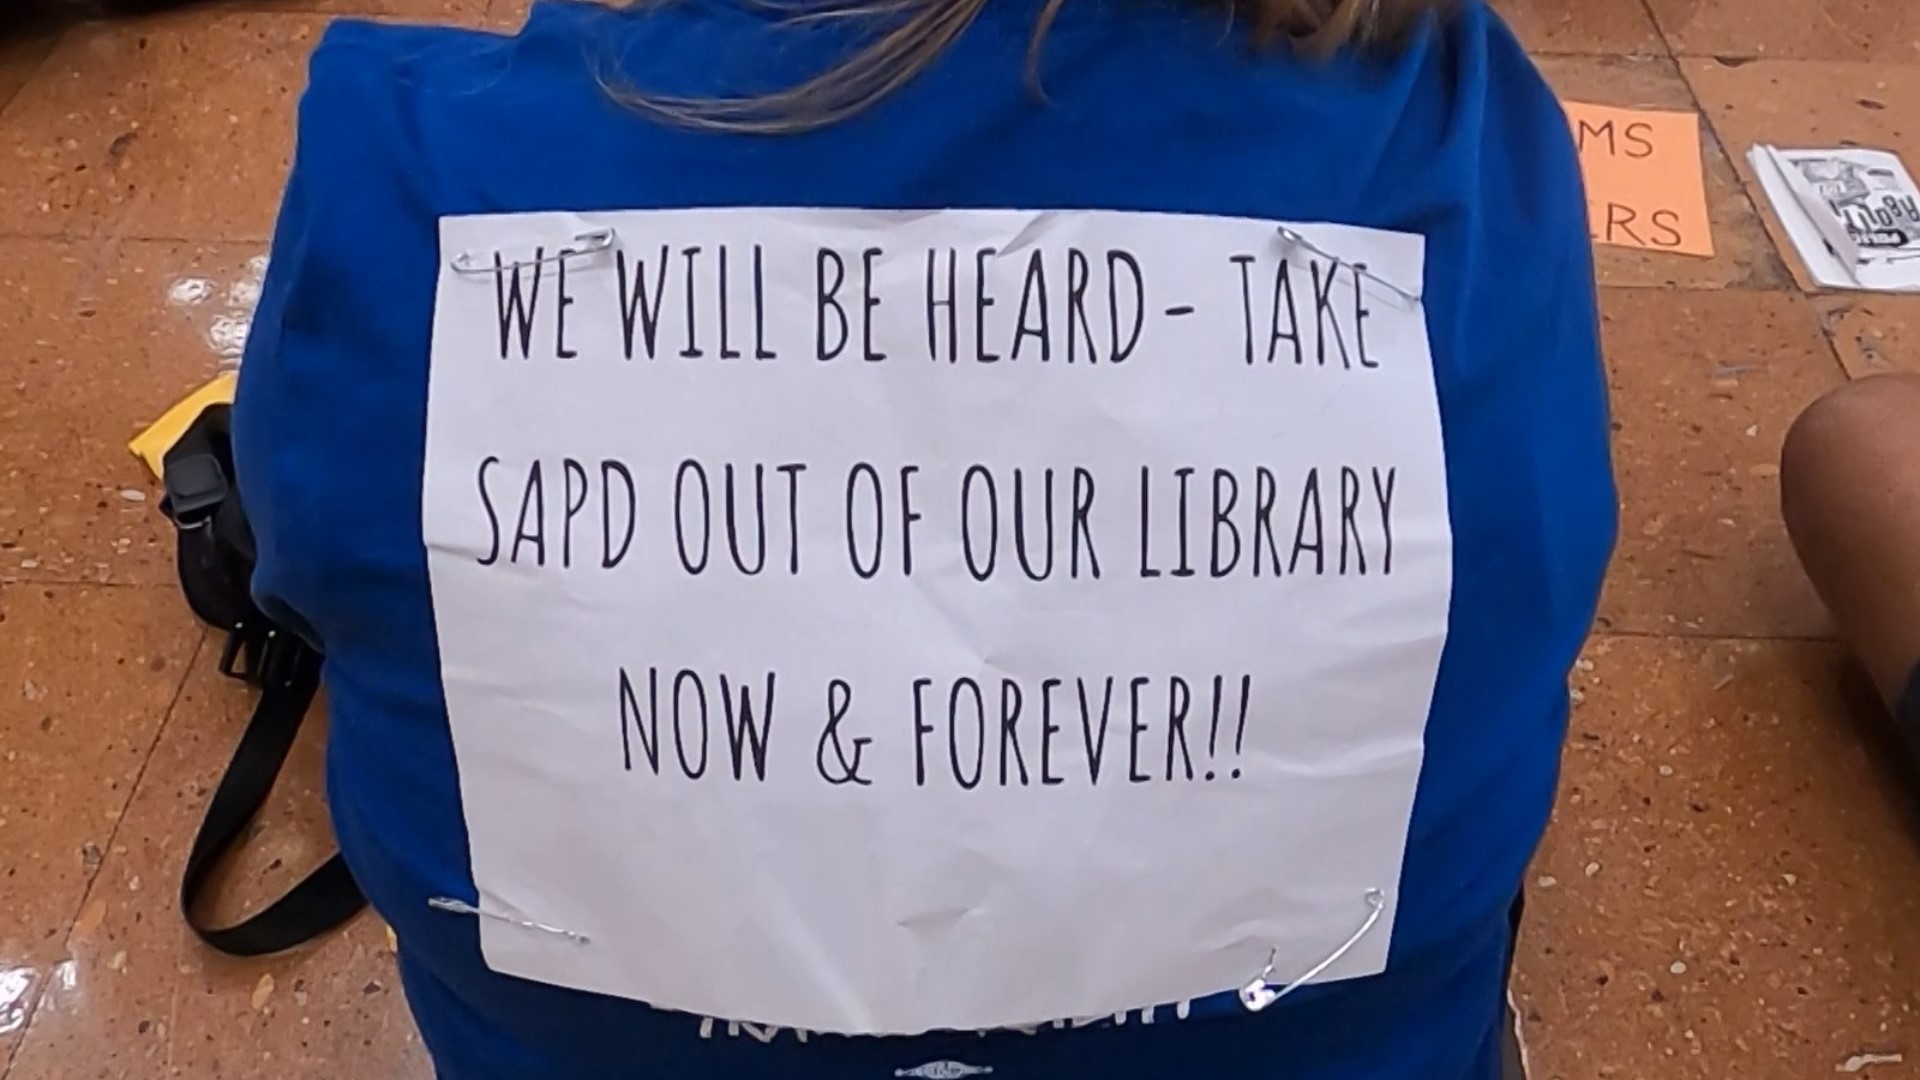 After more than a dozen assaults at the downtown library, they added armed officers to combat the issue. But not everyone is on board with the idea.